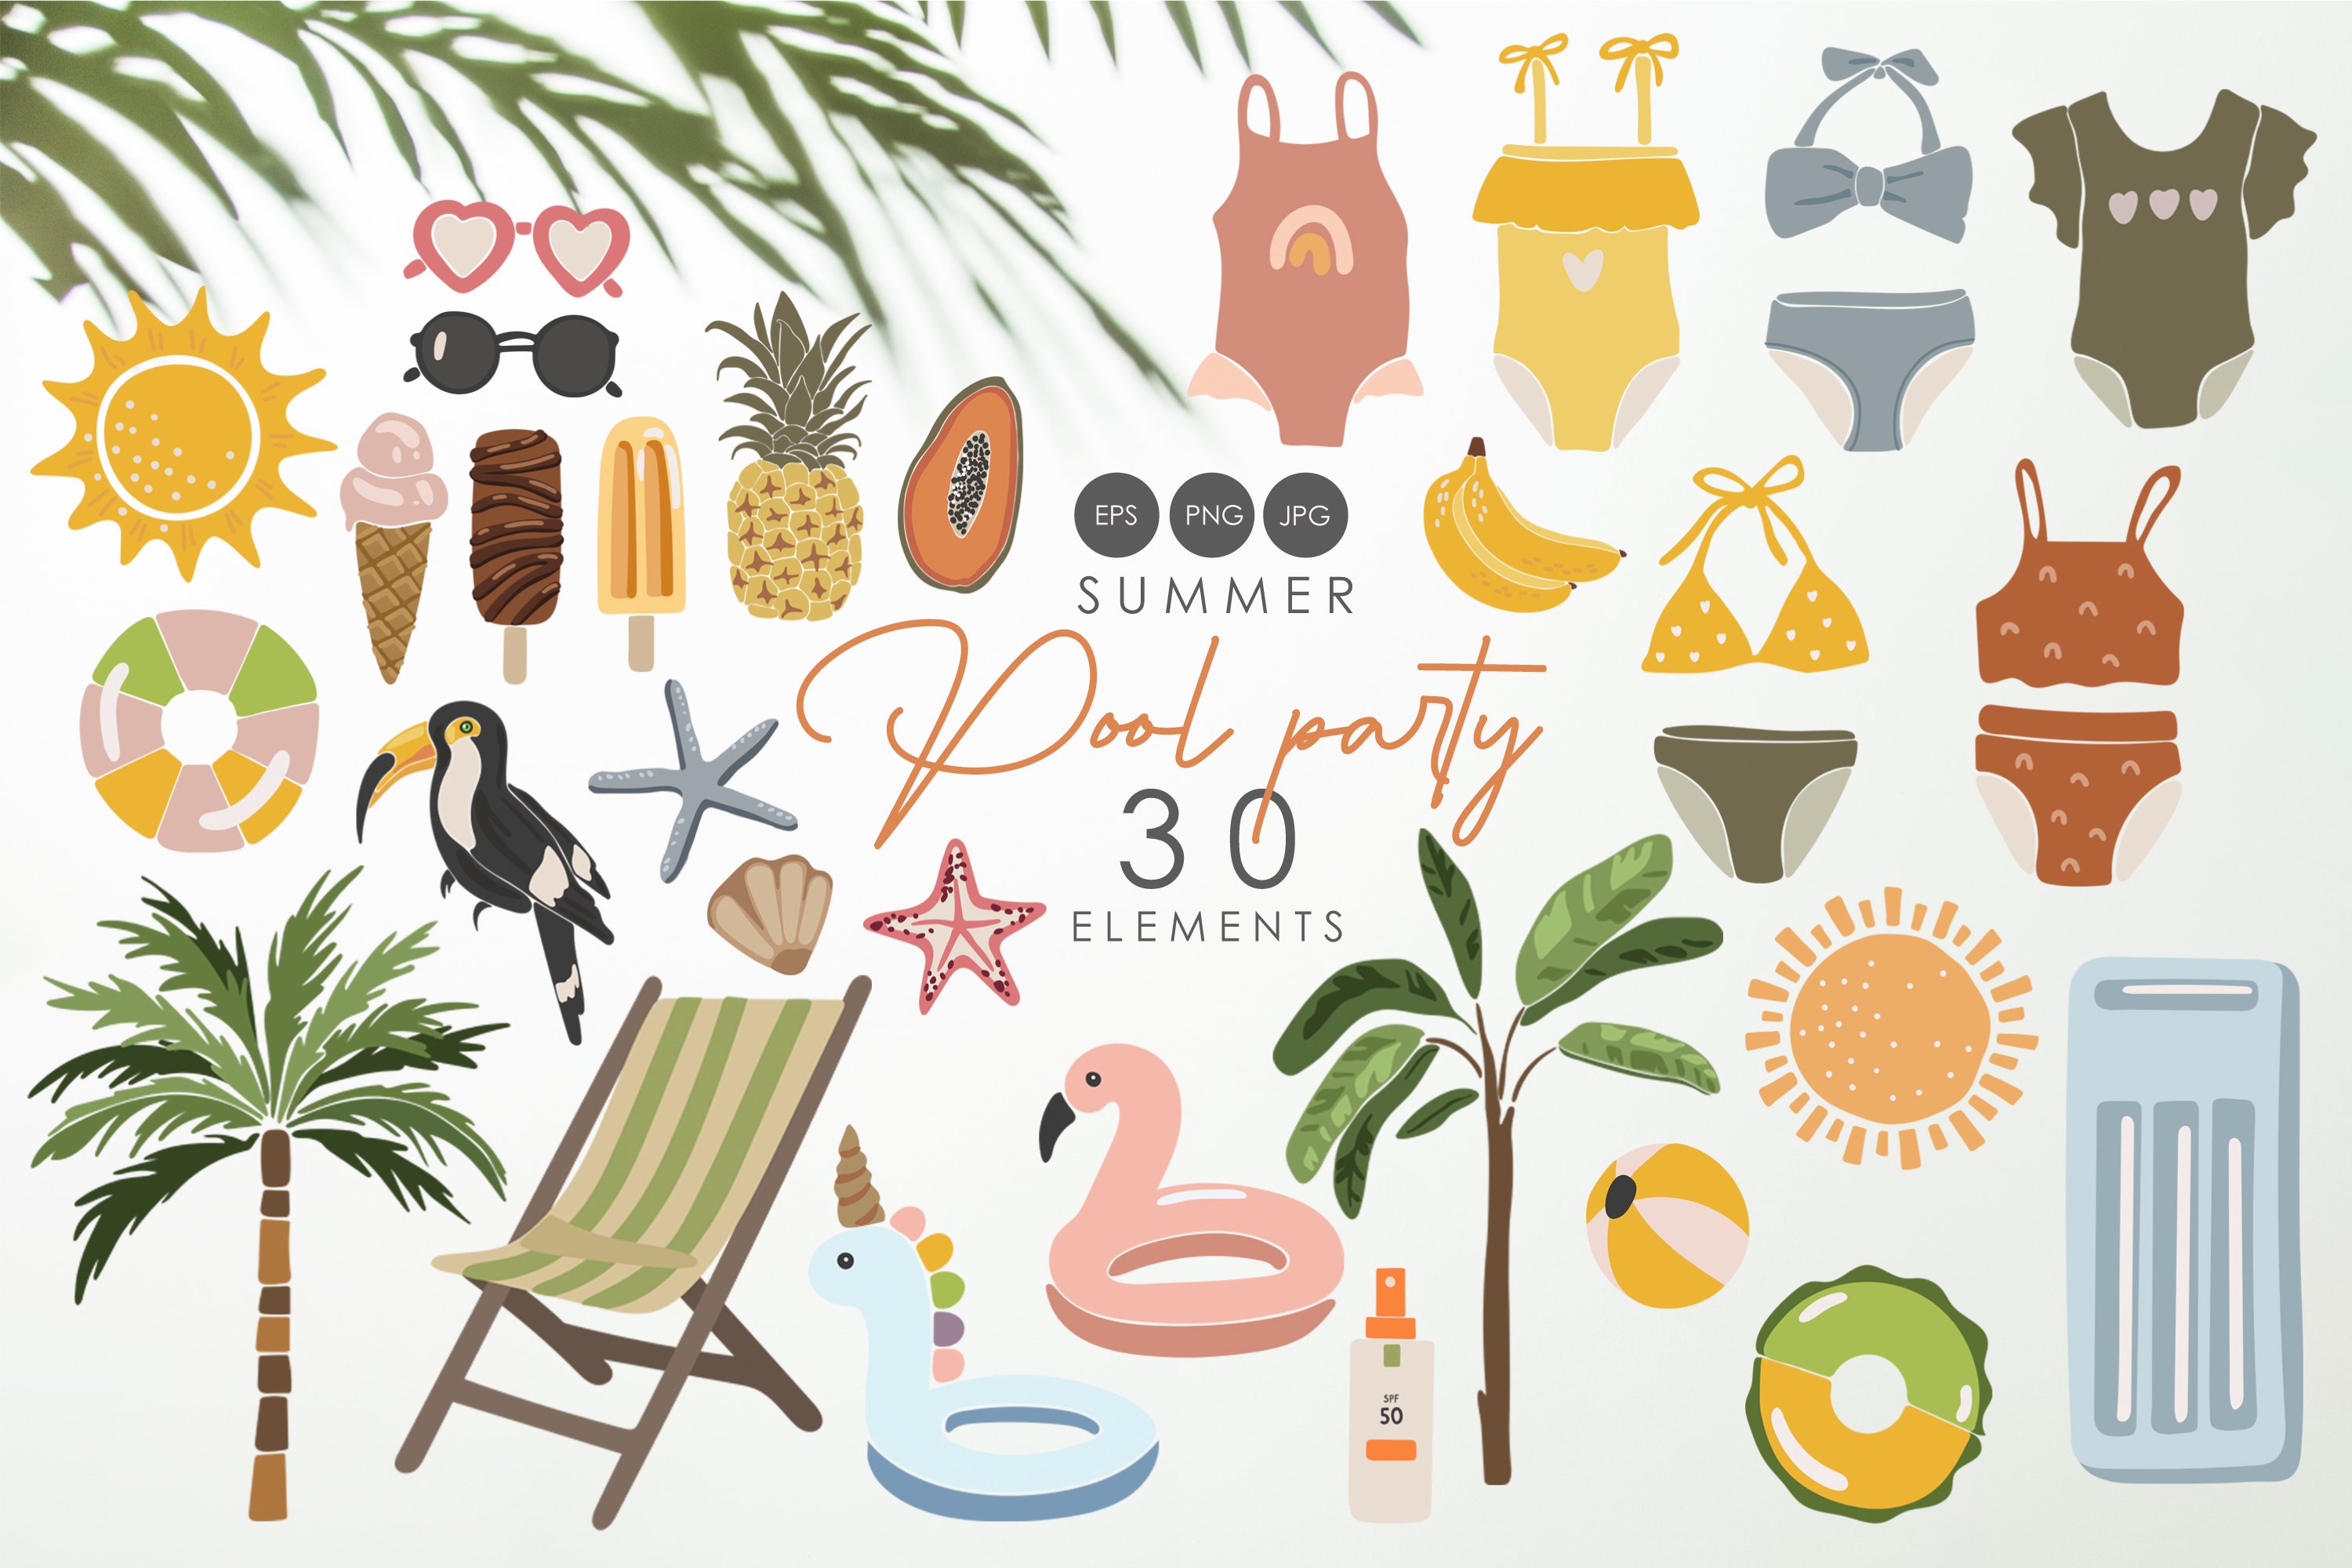 Summer pool party clipart cover image.